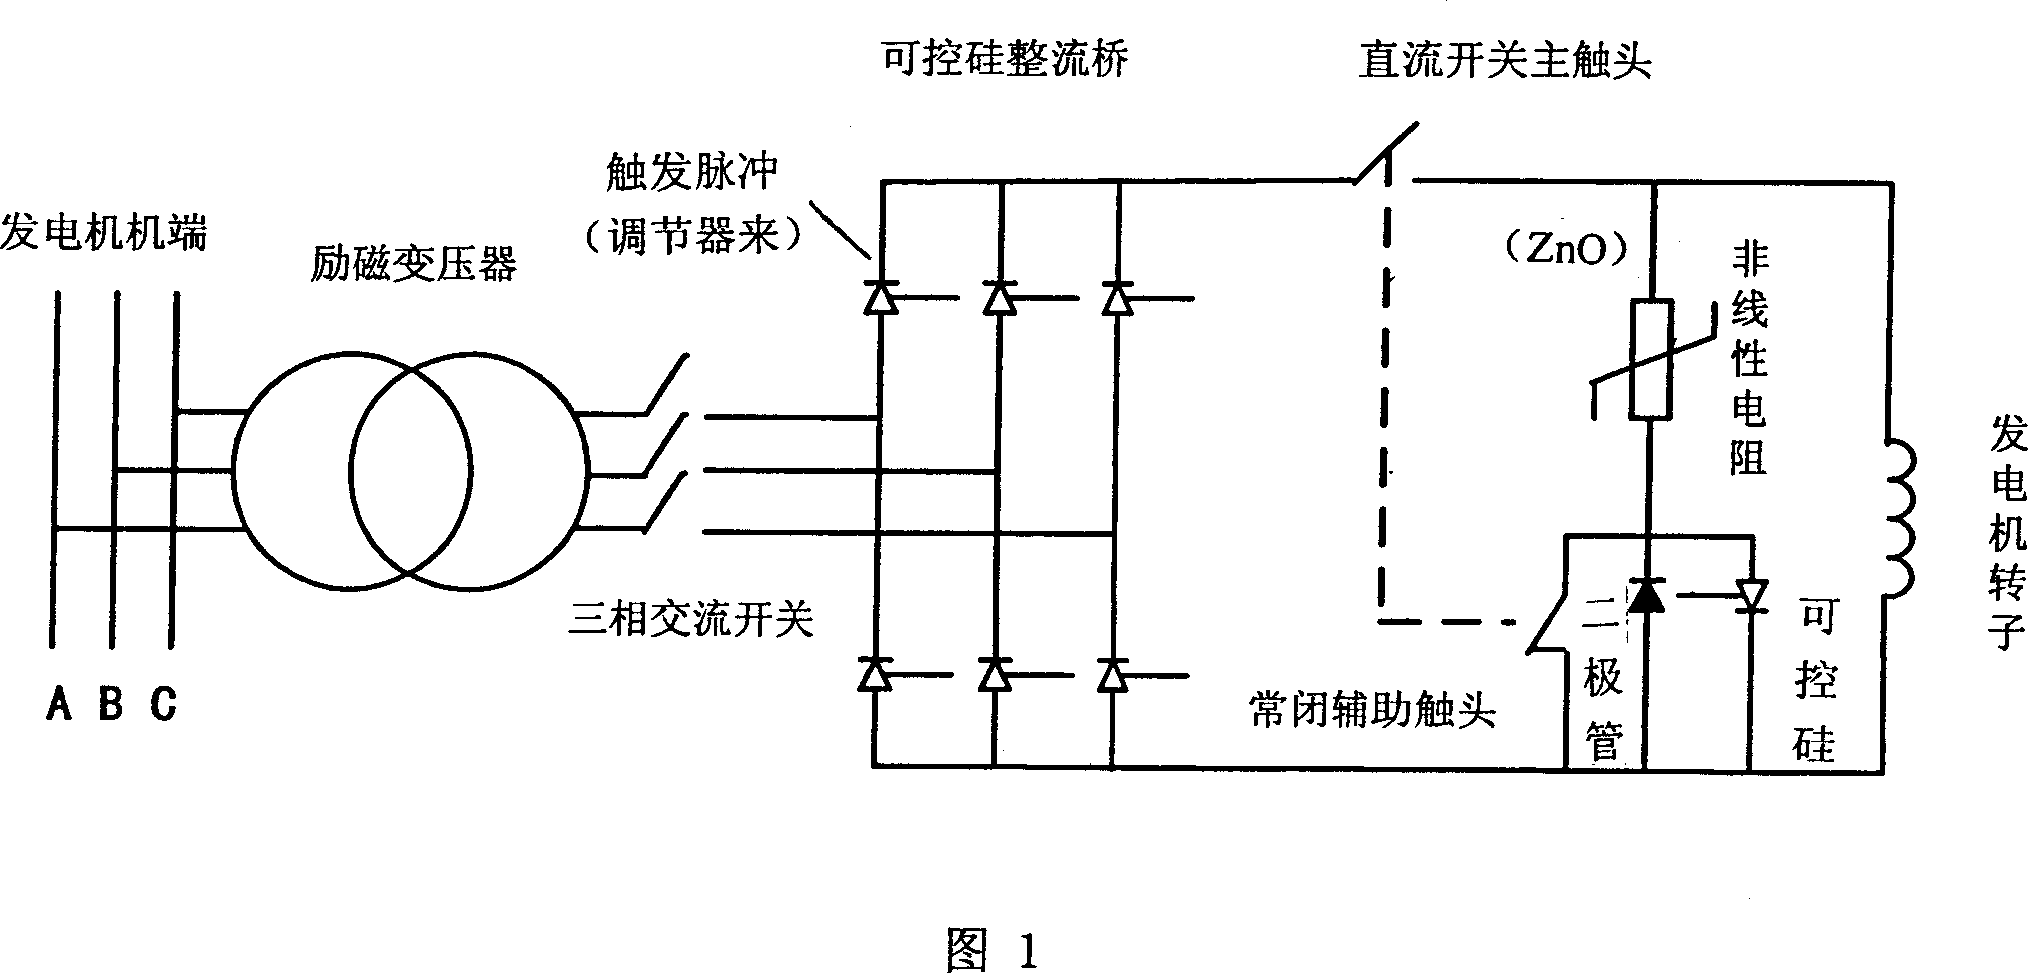 High reliable de-excitation method for generater